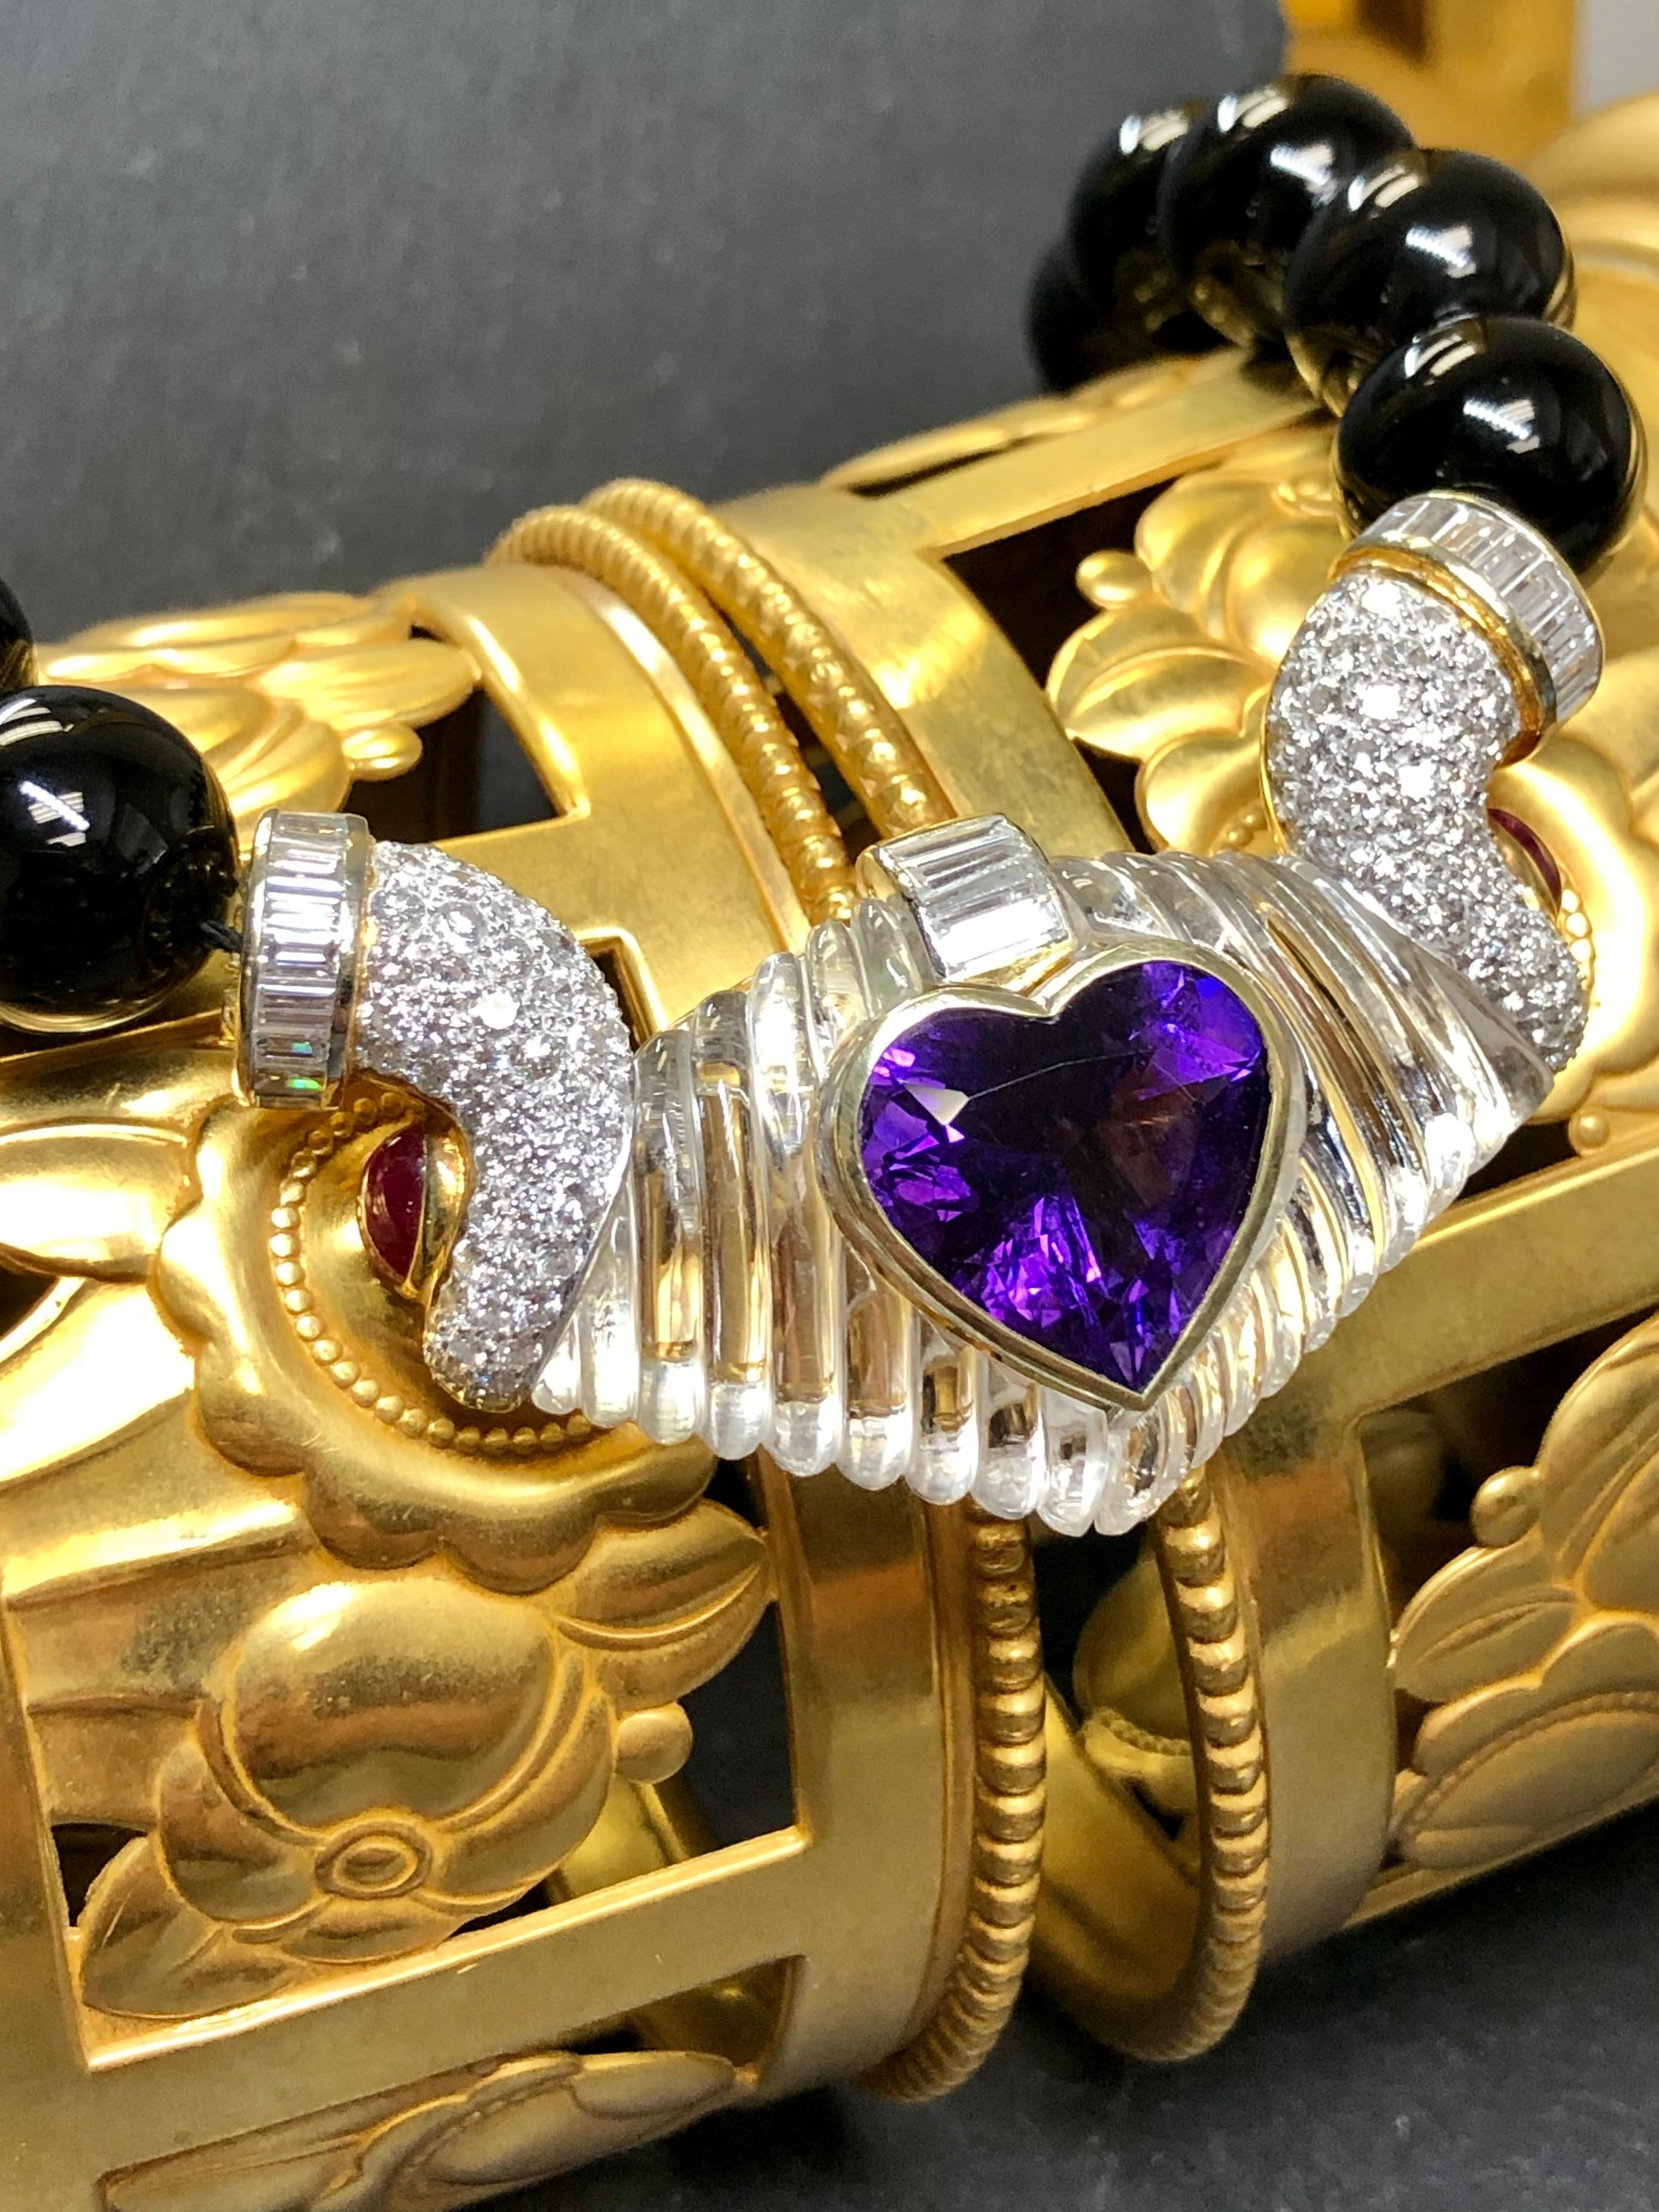 
A one-of-kind necklace done in 18K gold and pave set with approximately 4.80cttw in F-G color Vs1-2 round and baguette diamonds. The central portion is natural carved rock crystal quartz bezel set with a central heart shaped natural amethyst